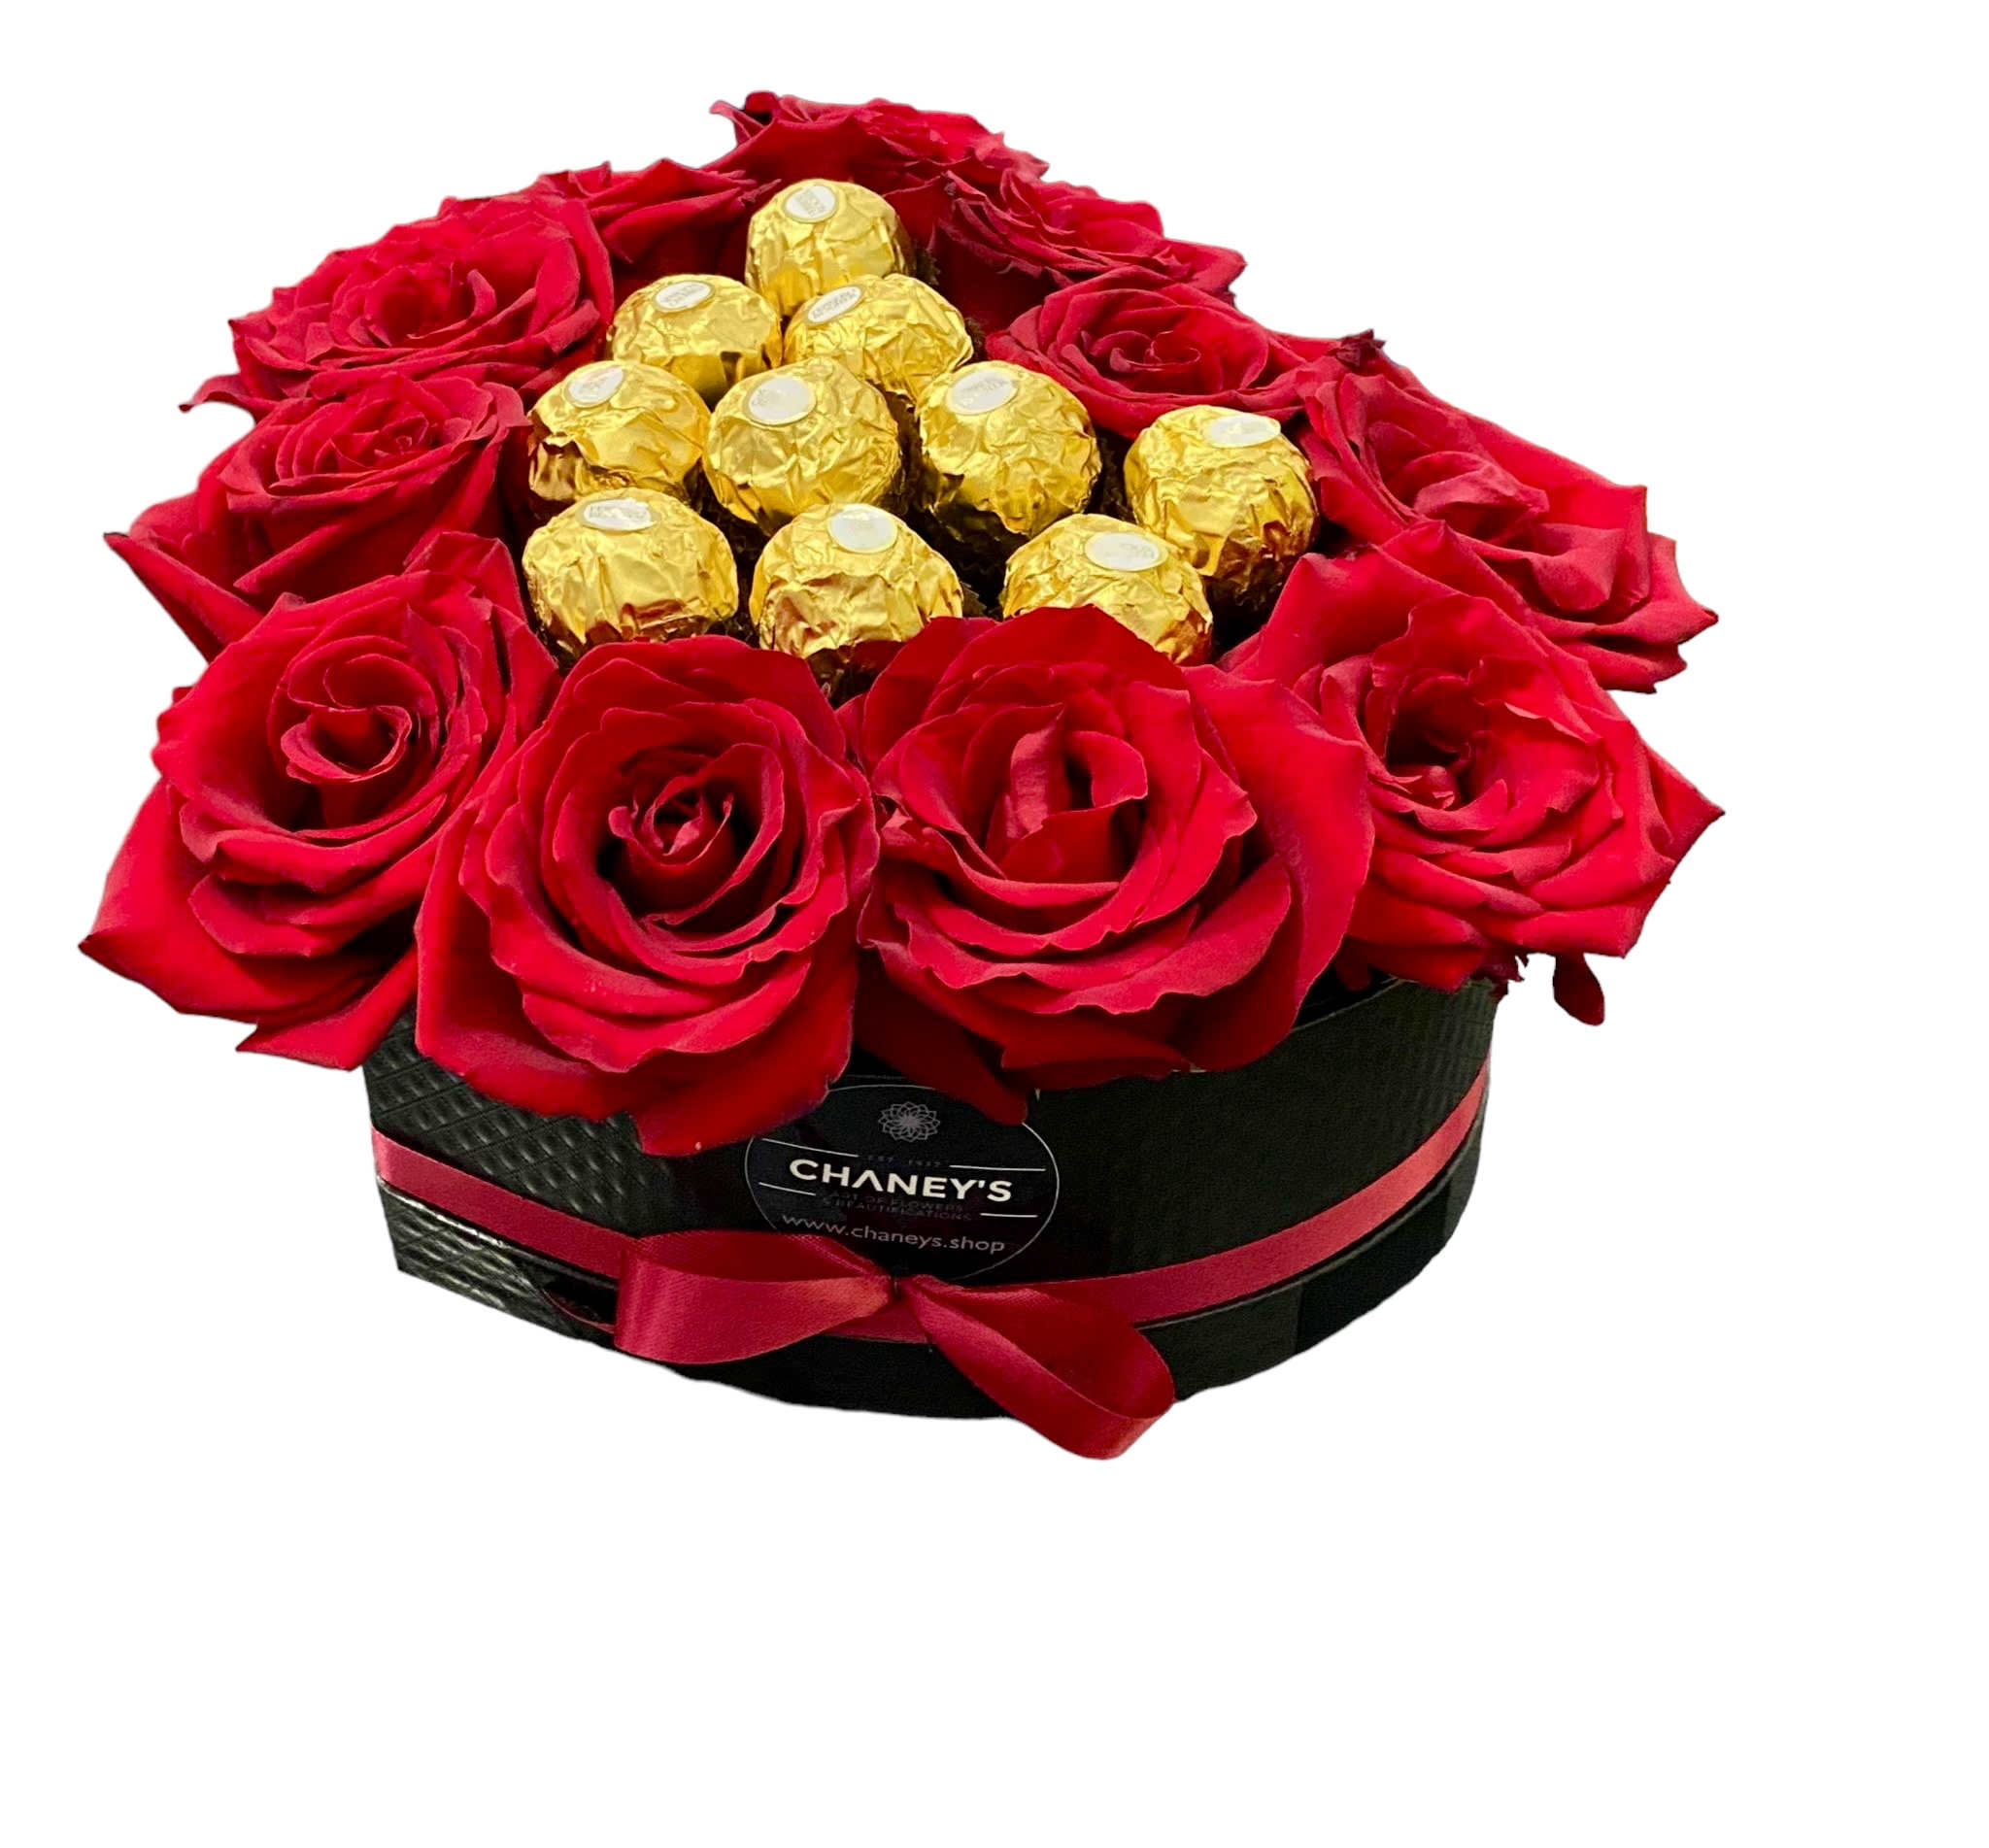 Chaney´s Black Heart Box - Nicely designed heart of 11 roses along with 10 counts of Ferrero Rocher. 2 more designs available in DeLuxe and Premium!